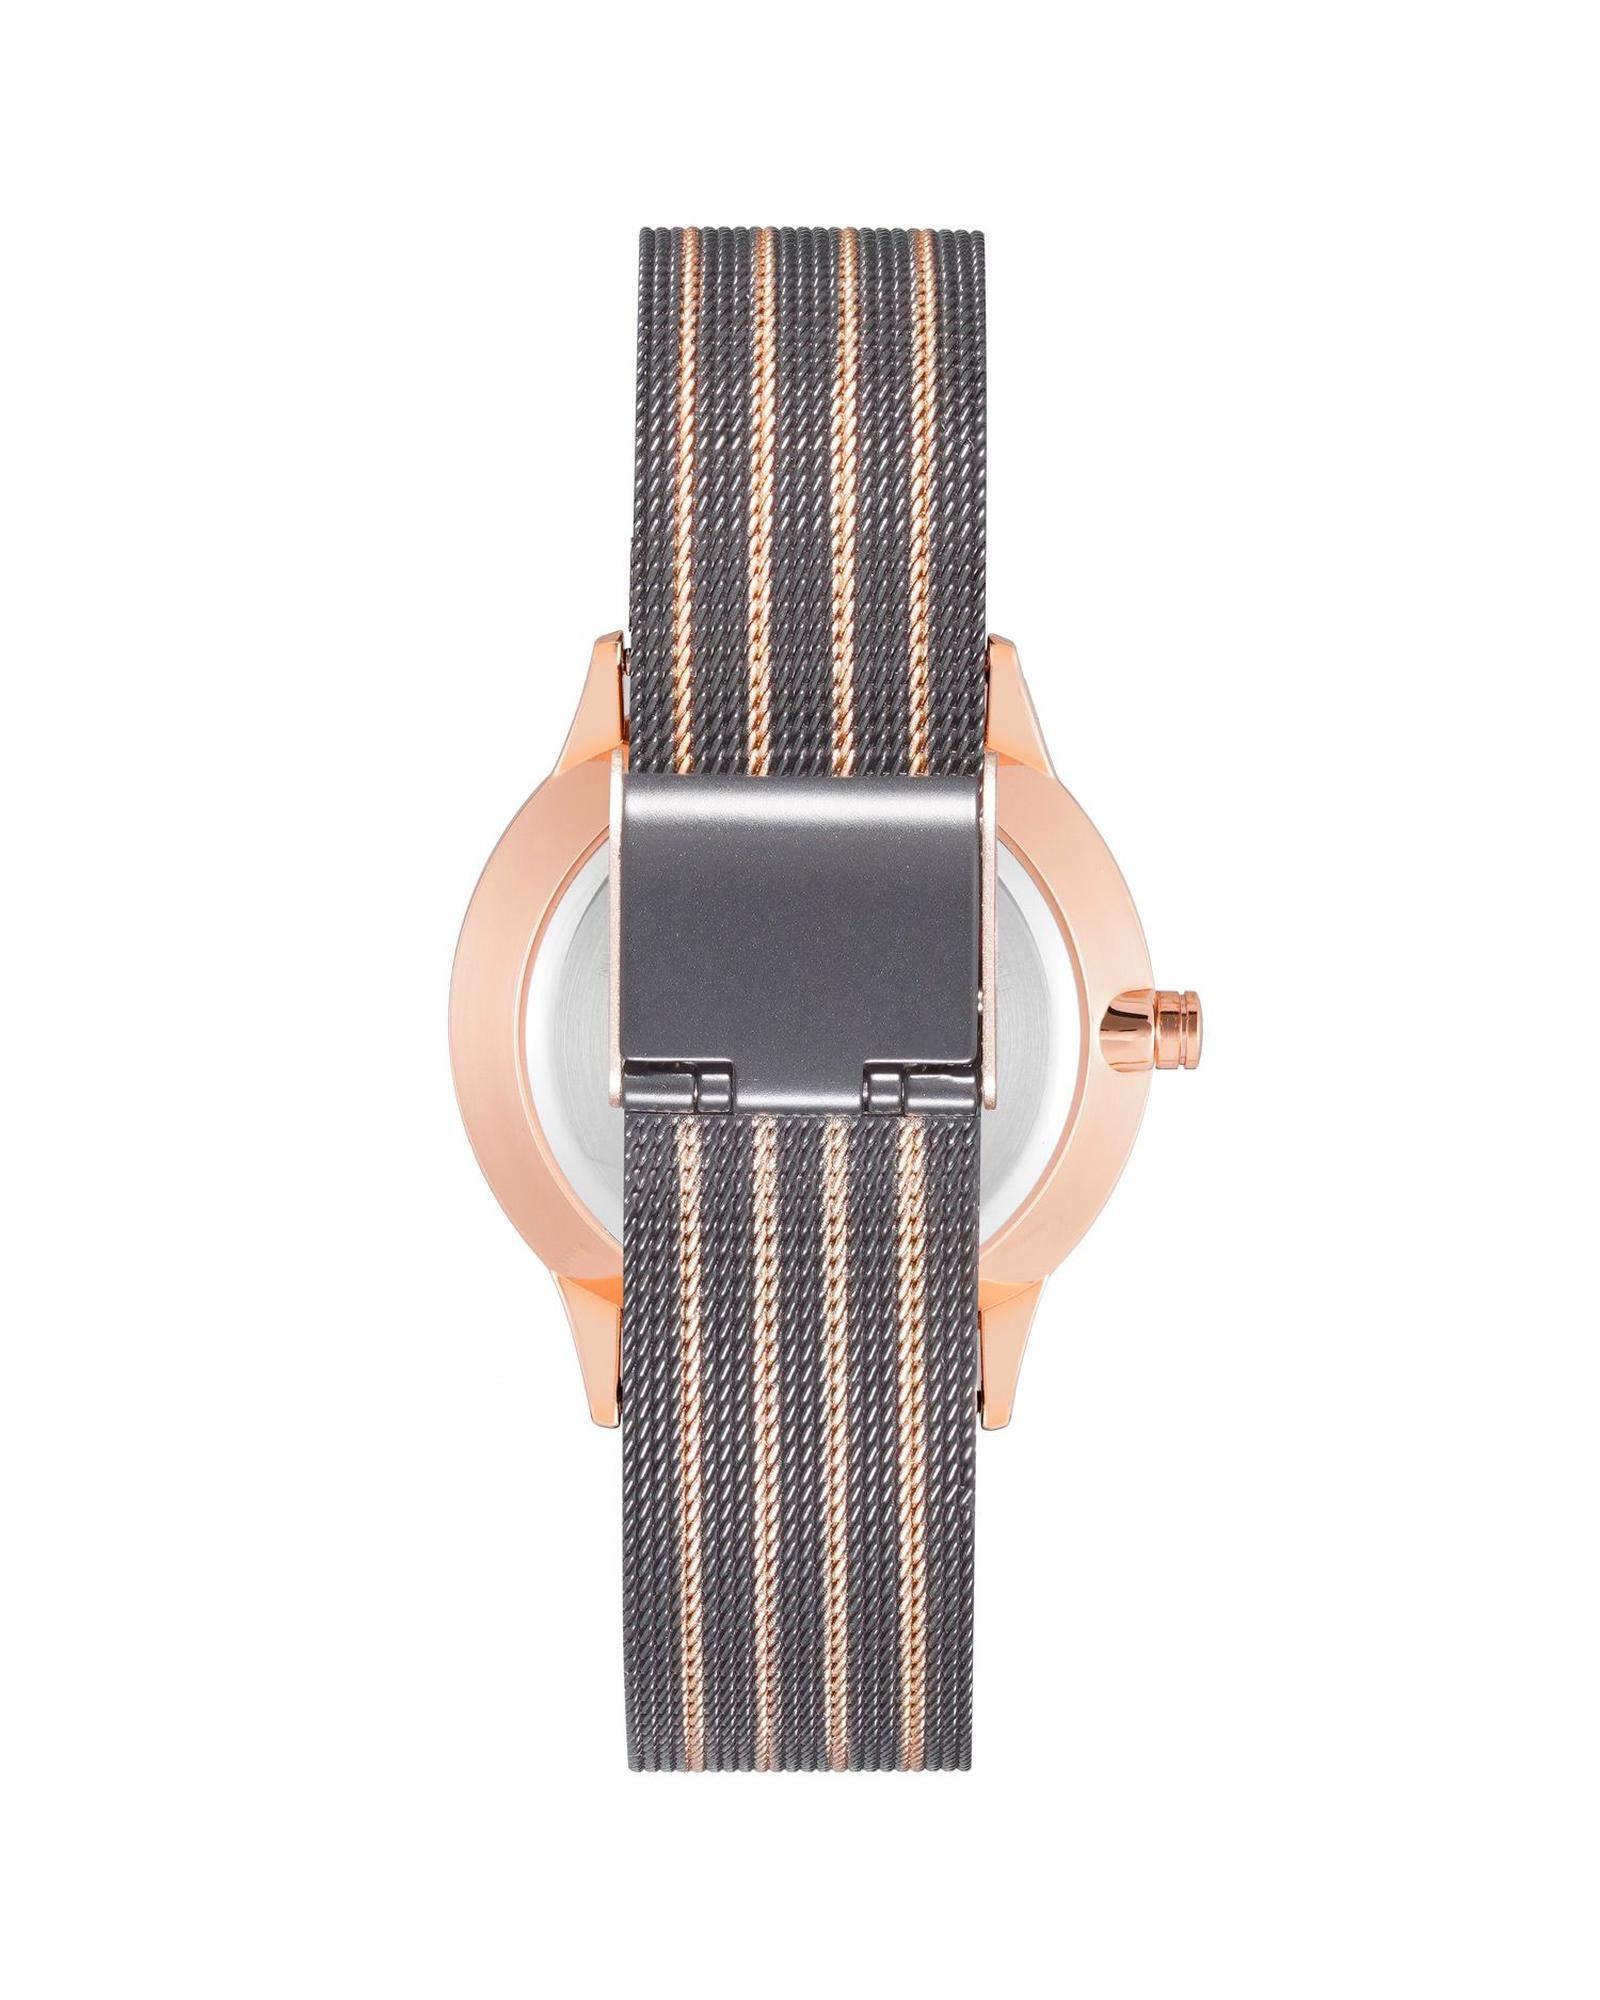 Rose Gold Fashion Watch with Quartz Movement One Size Women